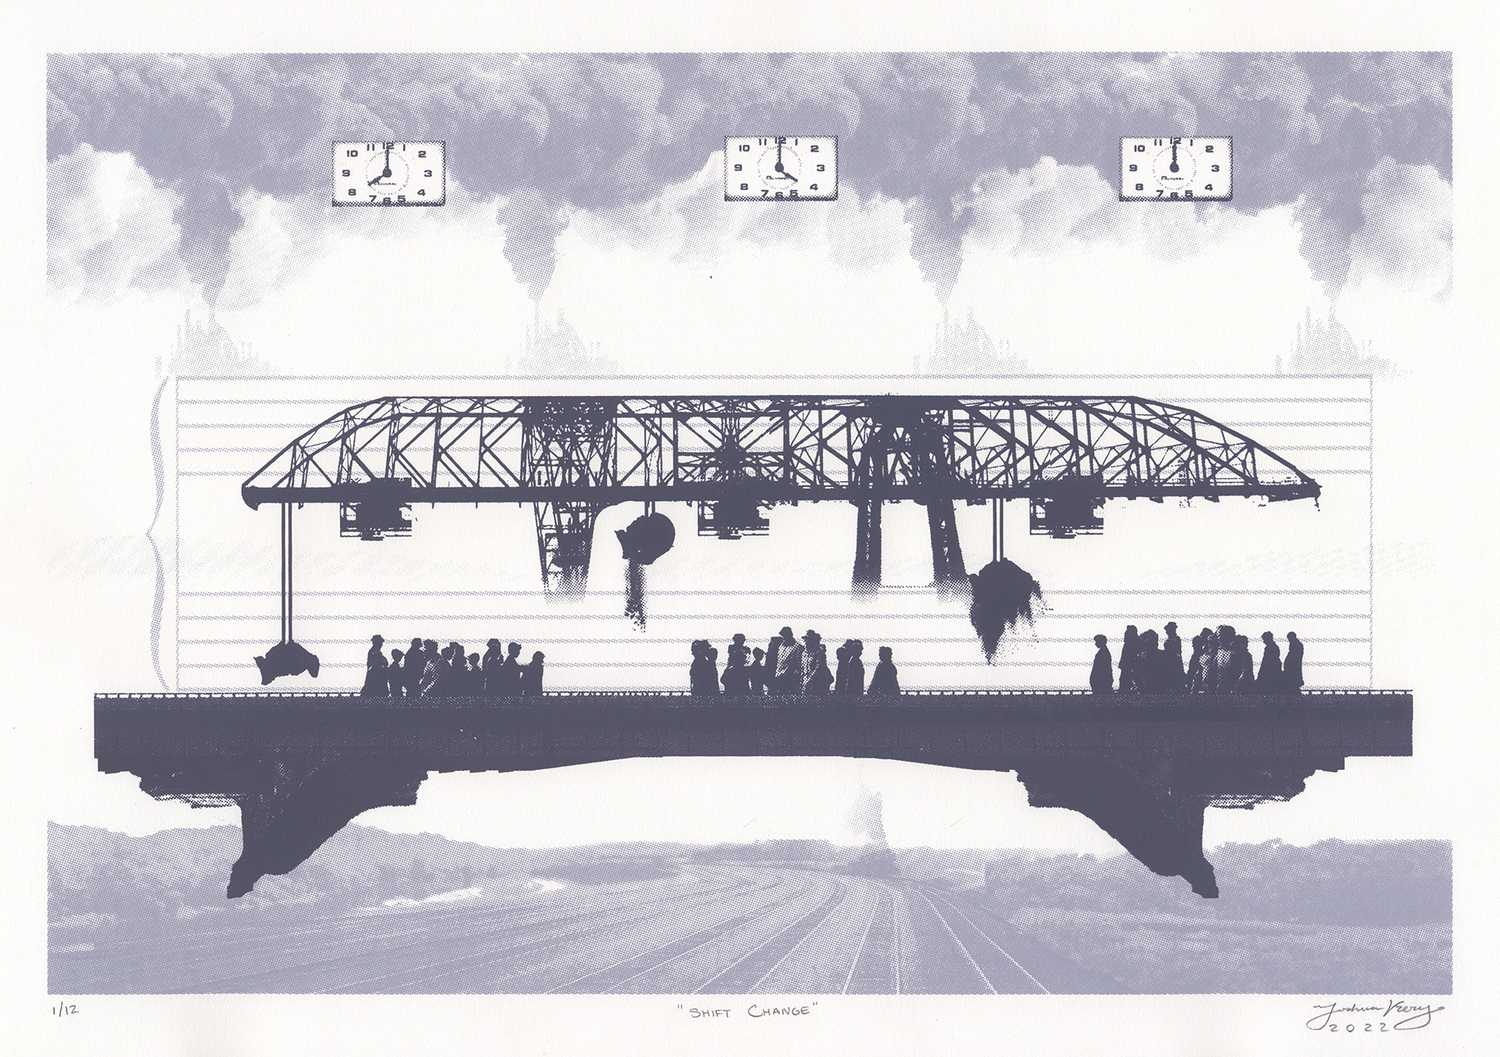 Picture of an ore crane - which looks like a truss bridge with three big metal claws hanging by cables underneath it - and a steel road bridge with pedestrians crossing it in three little clusters, each positioned just to the left of each of the three ore crane claws. Behind the crane and the bridge appears a musical staff; the pedestrians appear to be walking in front of the bass part of the staff while the ore crane appears in front of the treble part. Above the crane and bridge, each aligned horizontally with the three clusters of pedestrians, three square clocks appear among smokey clouds. Their times read 8 a.m., 4 p.m. and midnight, respectively, and in that order from left to right. Below the bridge, a faint landscape appears, with railroad tracks extending into the distance and the smoke of a locomotive that's just crossed over the horizon.